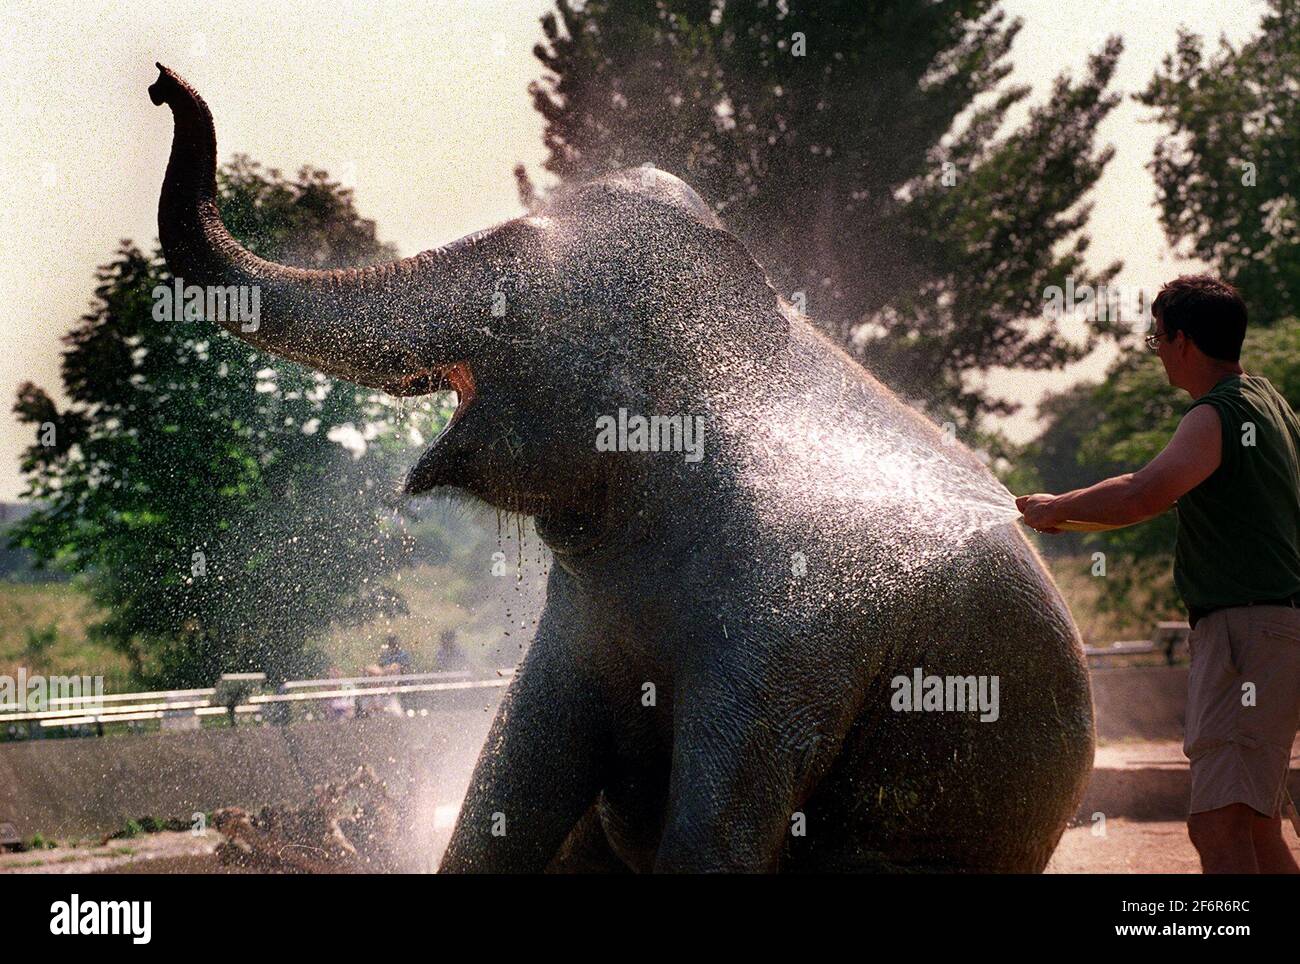 WEATHER SUMMER ELEPHANT WASH REGENTS PARK ZOOLAYANG LAYANG THE ASIAN ELEPHANT TAKES A WELCOME SHOWER FROM HIS HANDLER JIM ROBSON. Stock Photo